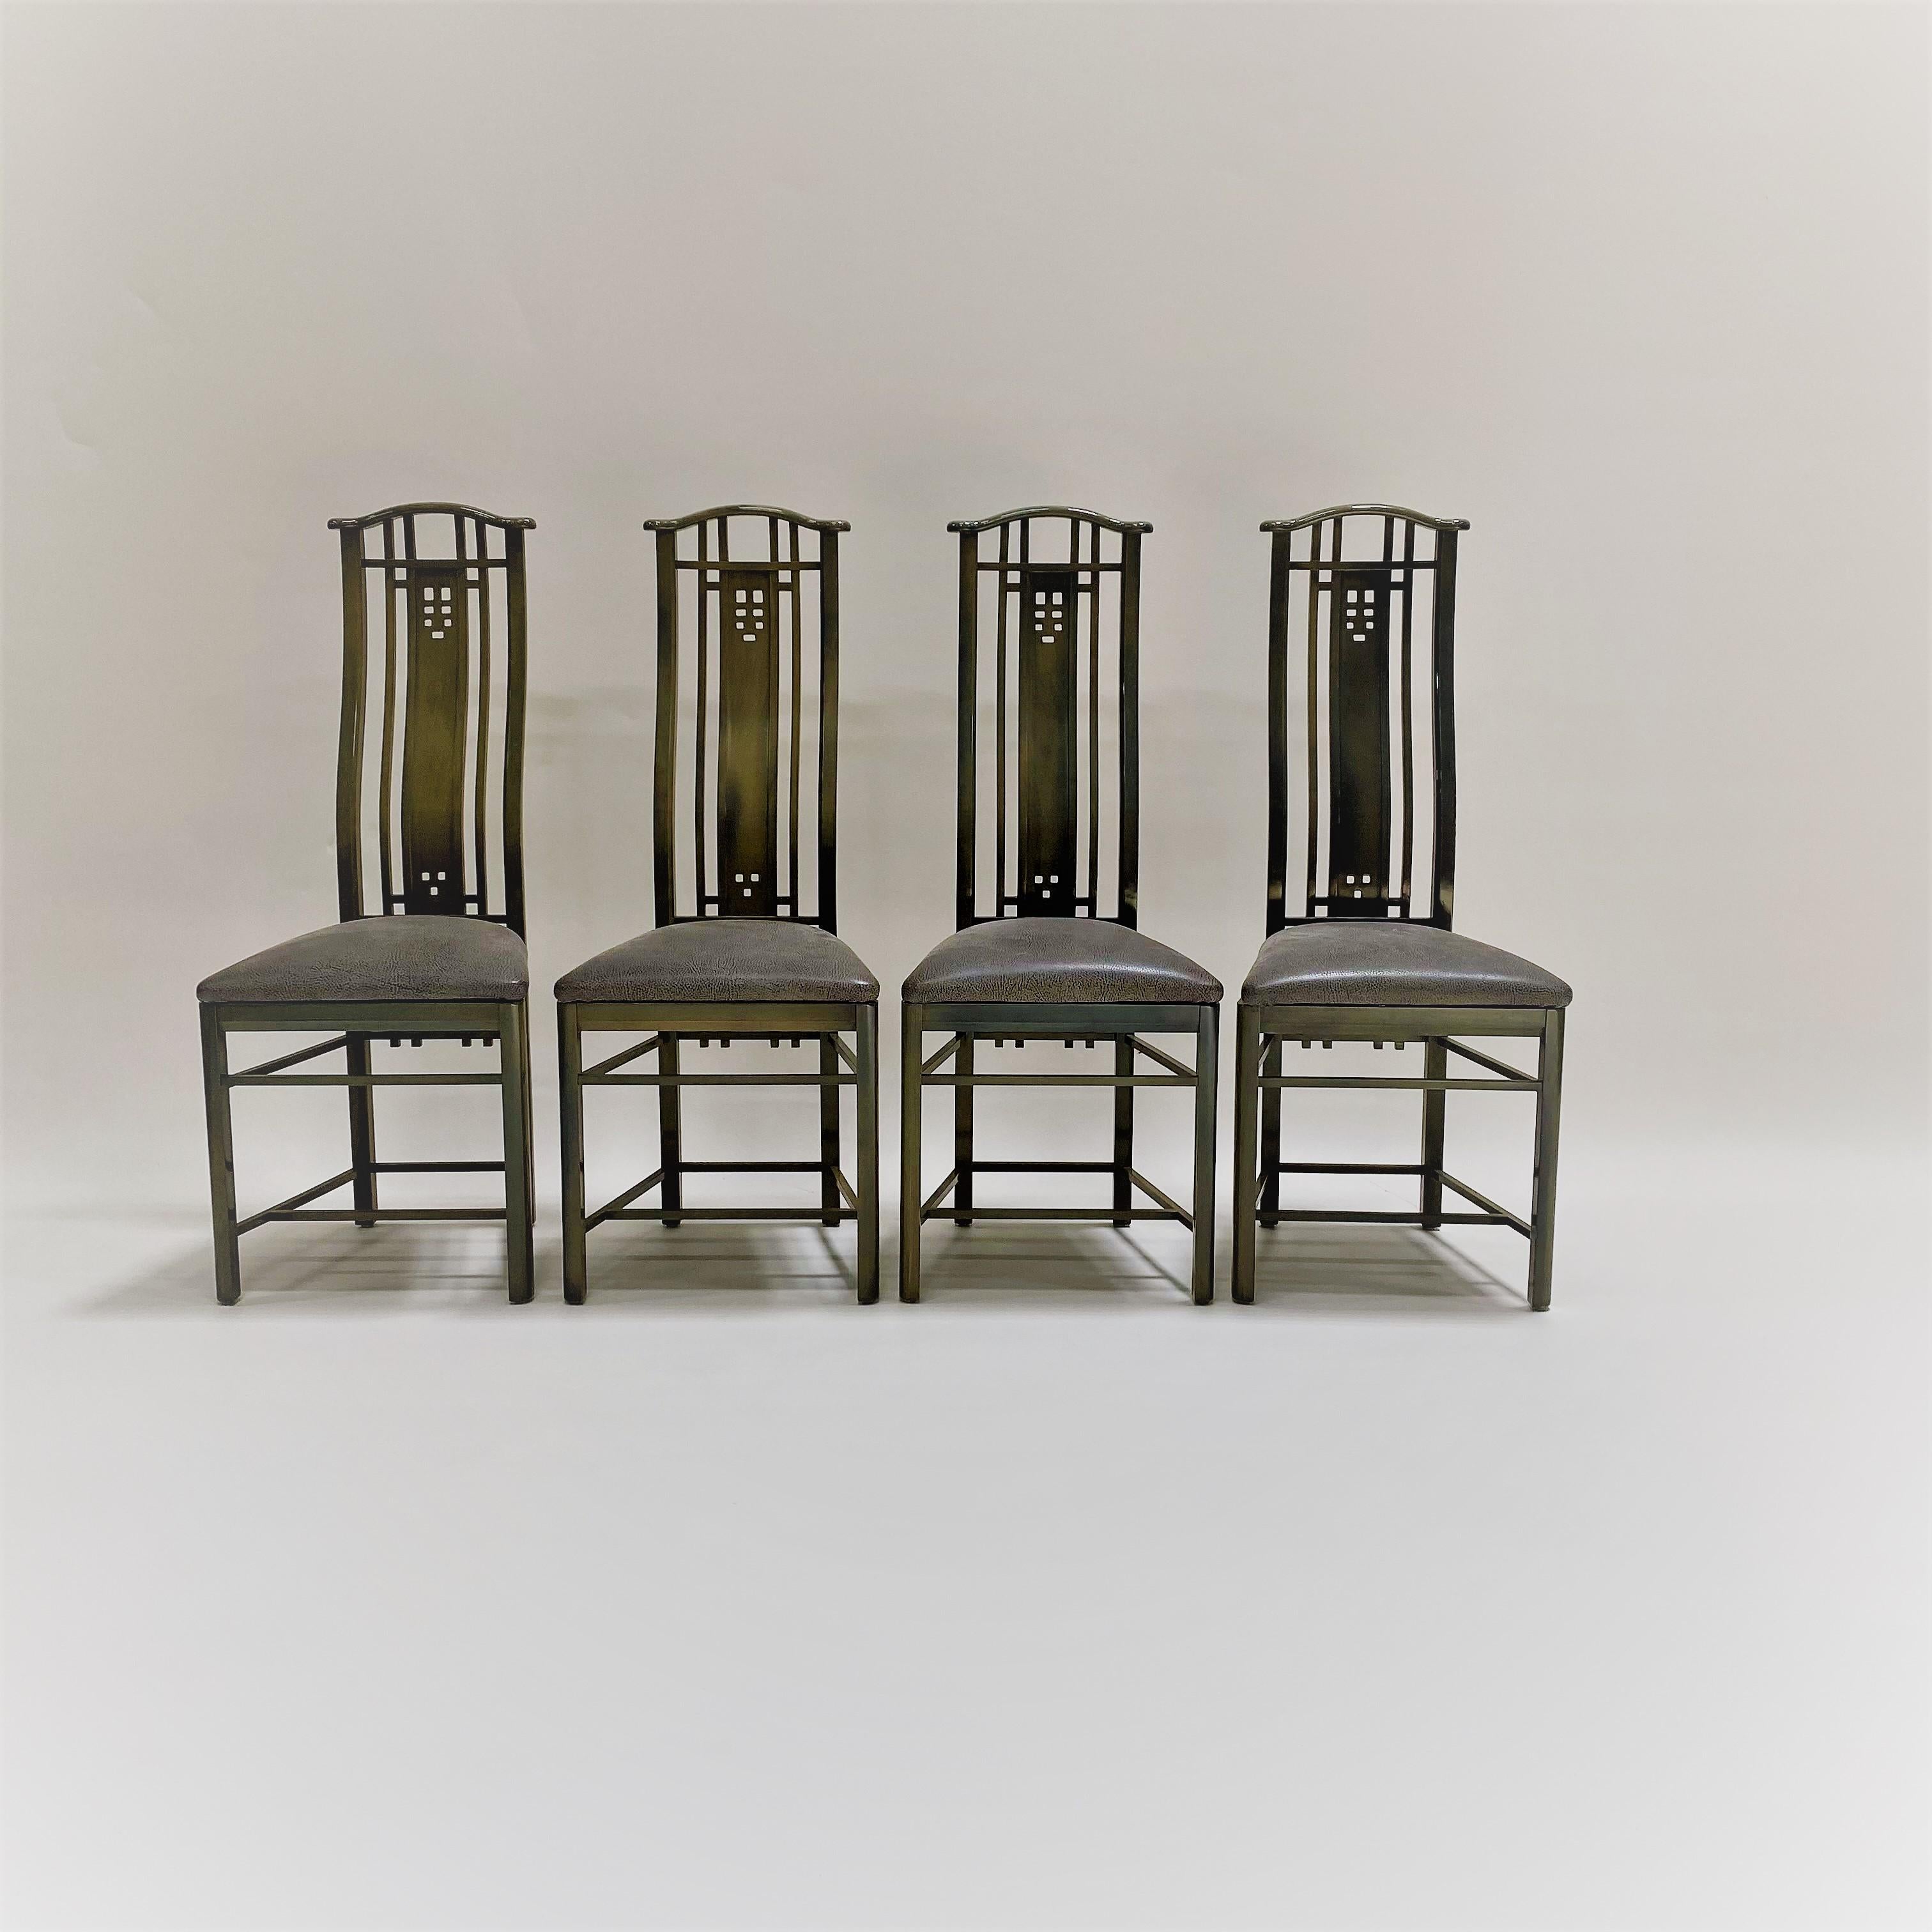 Elegant italian design dining room chairs designed by Umberto Asnago for Giorgetti. 

The set consists 4 high back solid wooden dining chairs with the original upholstery. Two tone high gloss lacquer in very good condition.

Elegant design with